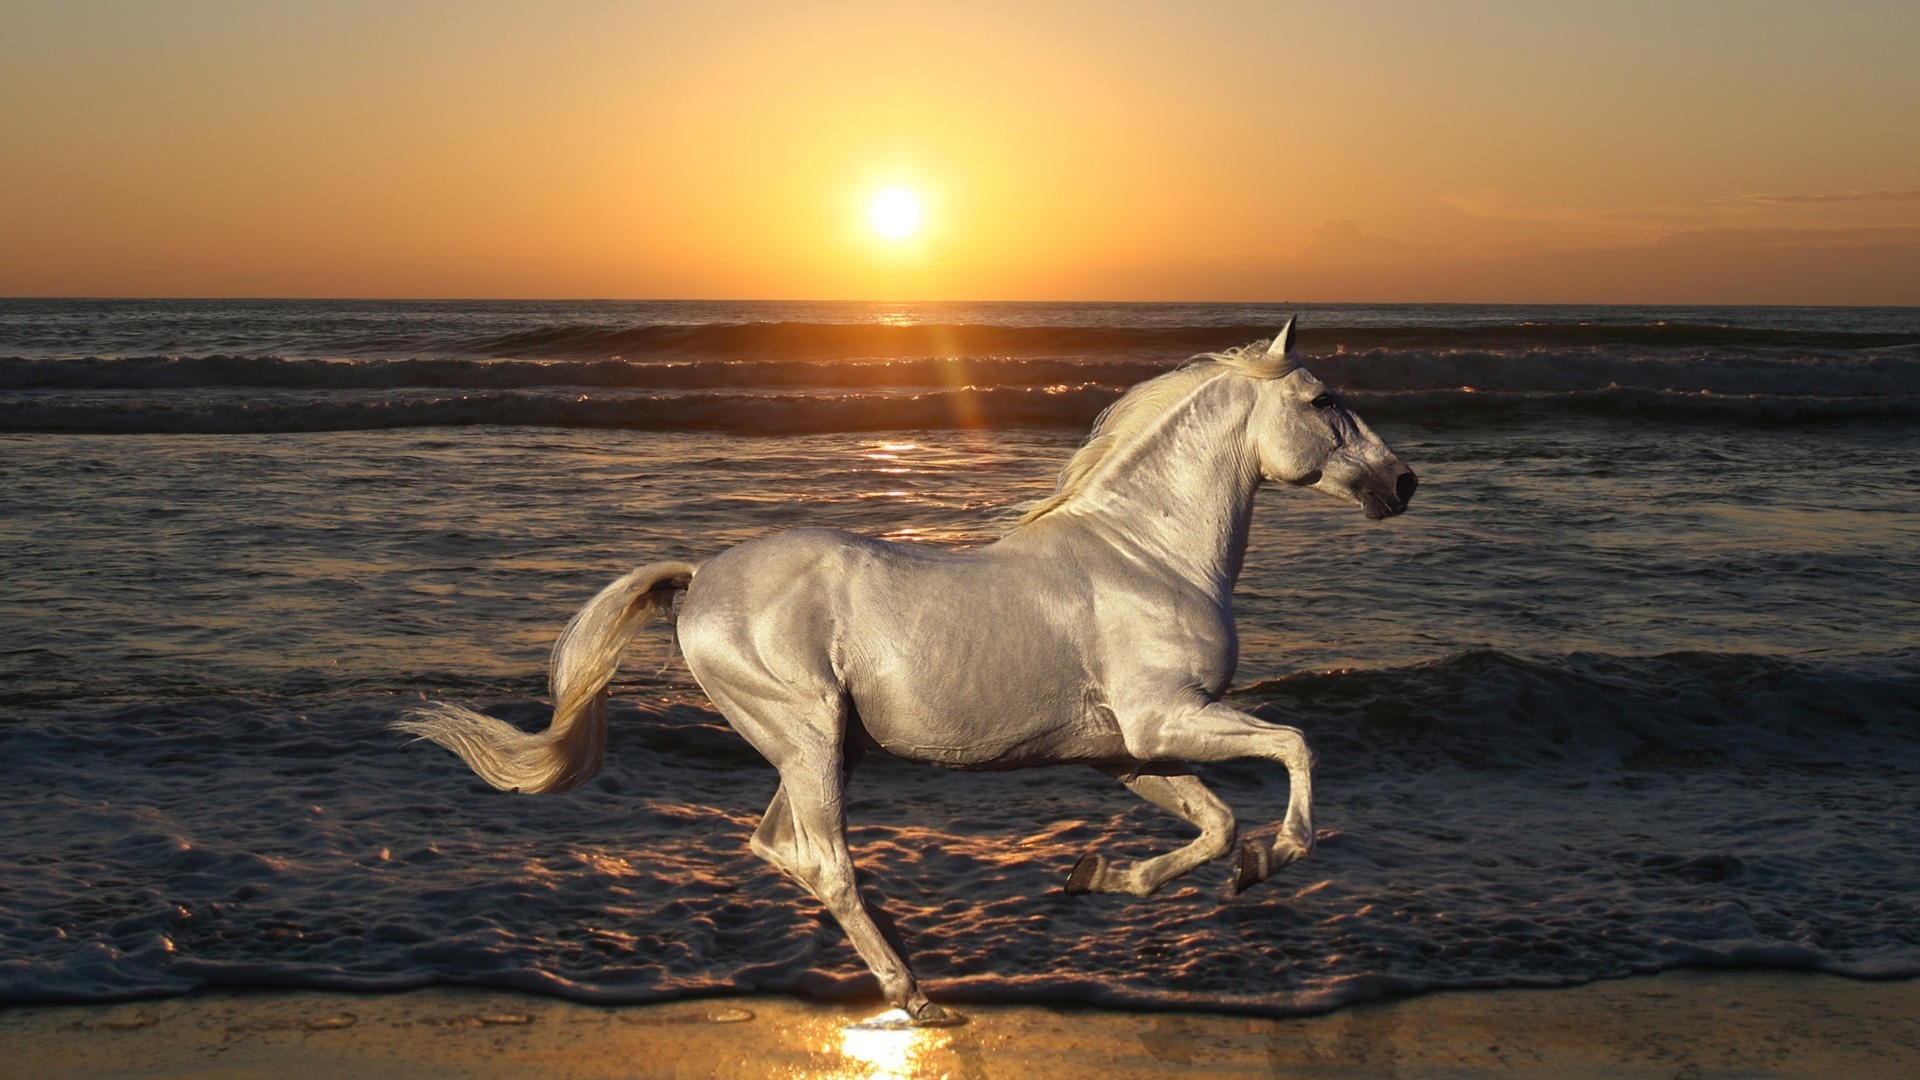 wallpaper added on 22 04 2013 category horse downloads 496 tags horse